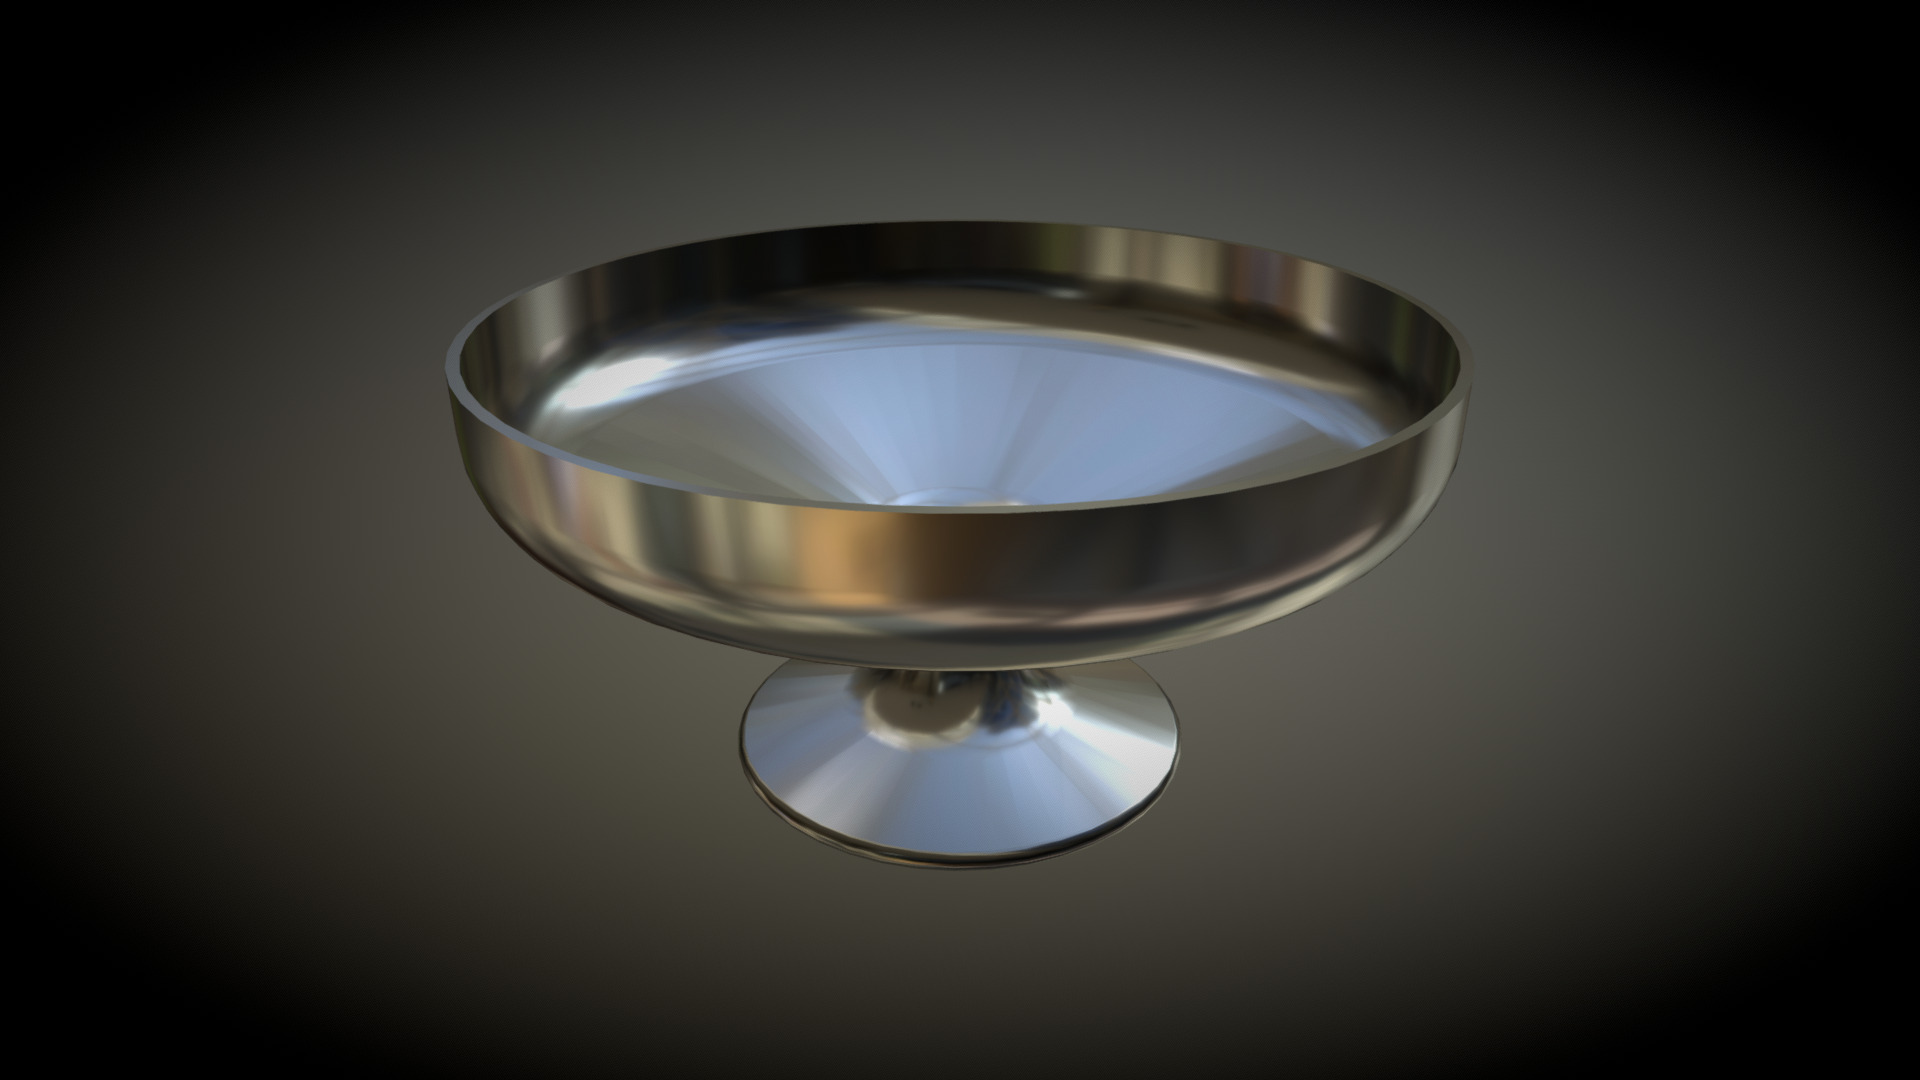 3D model Sugar bowl - This is a 3D model of the Sugar bowl. The 3D model is about a light bulb on a black background.